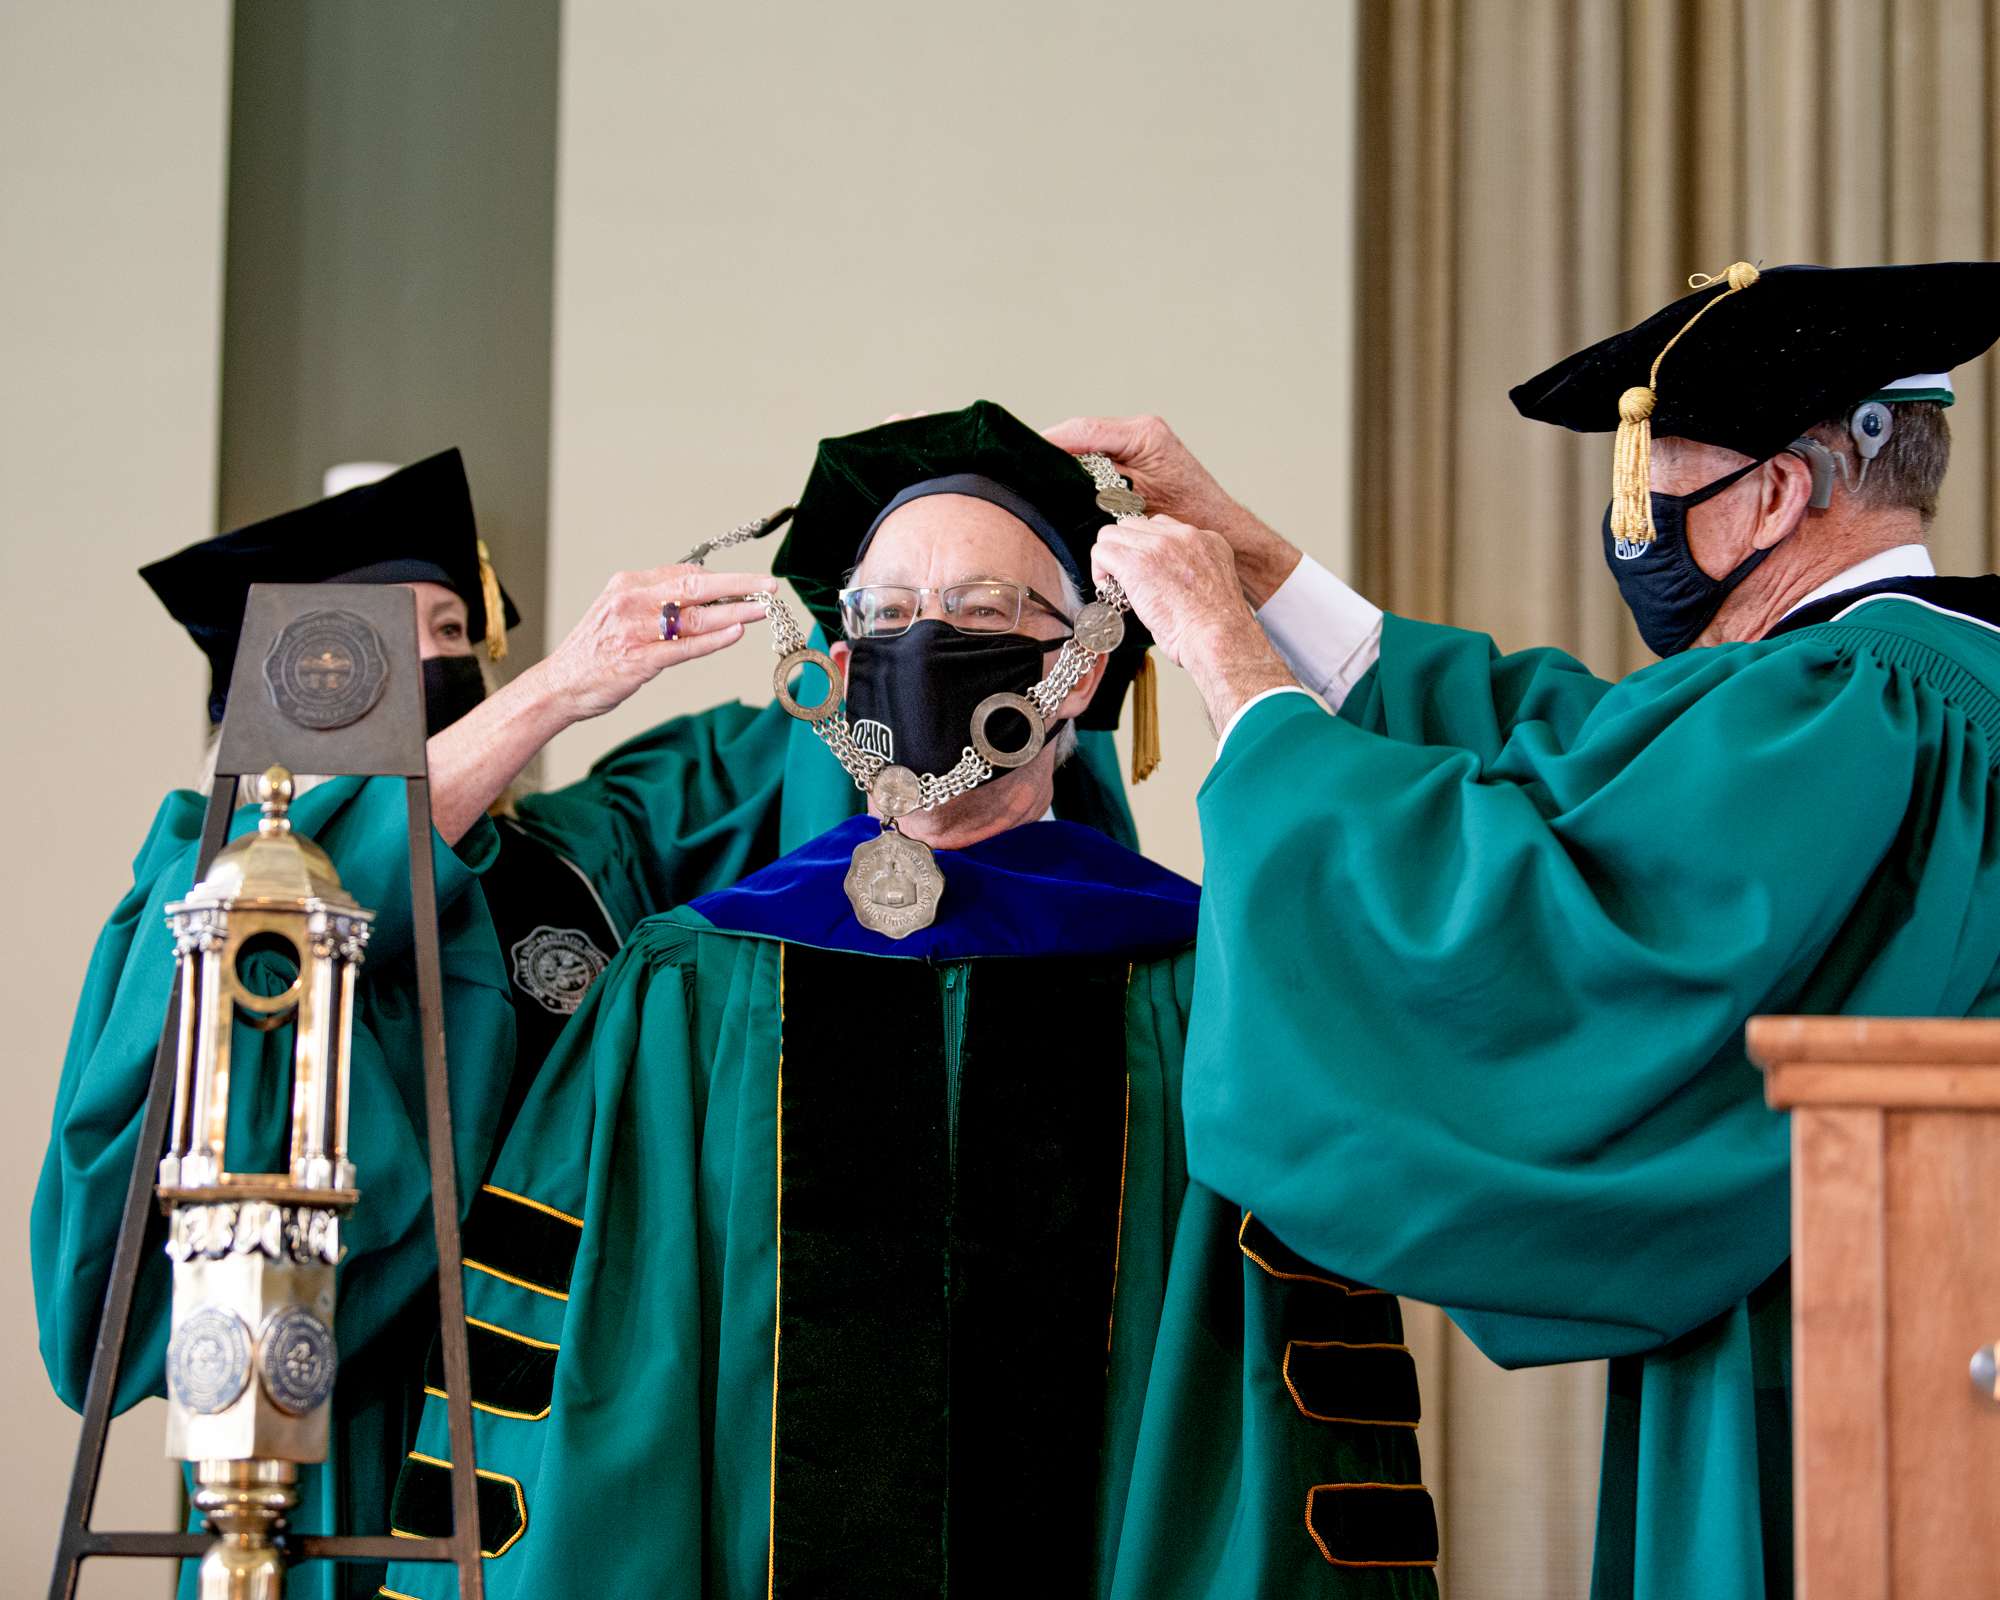 Dr. Hugh Sherman receives a medallion during his inauguration as 22nd President of Ohio University